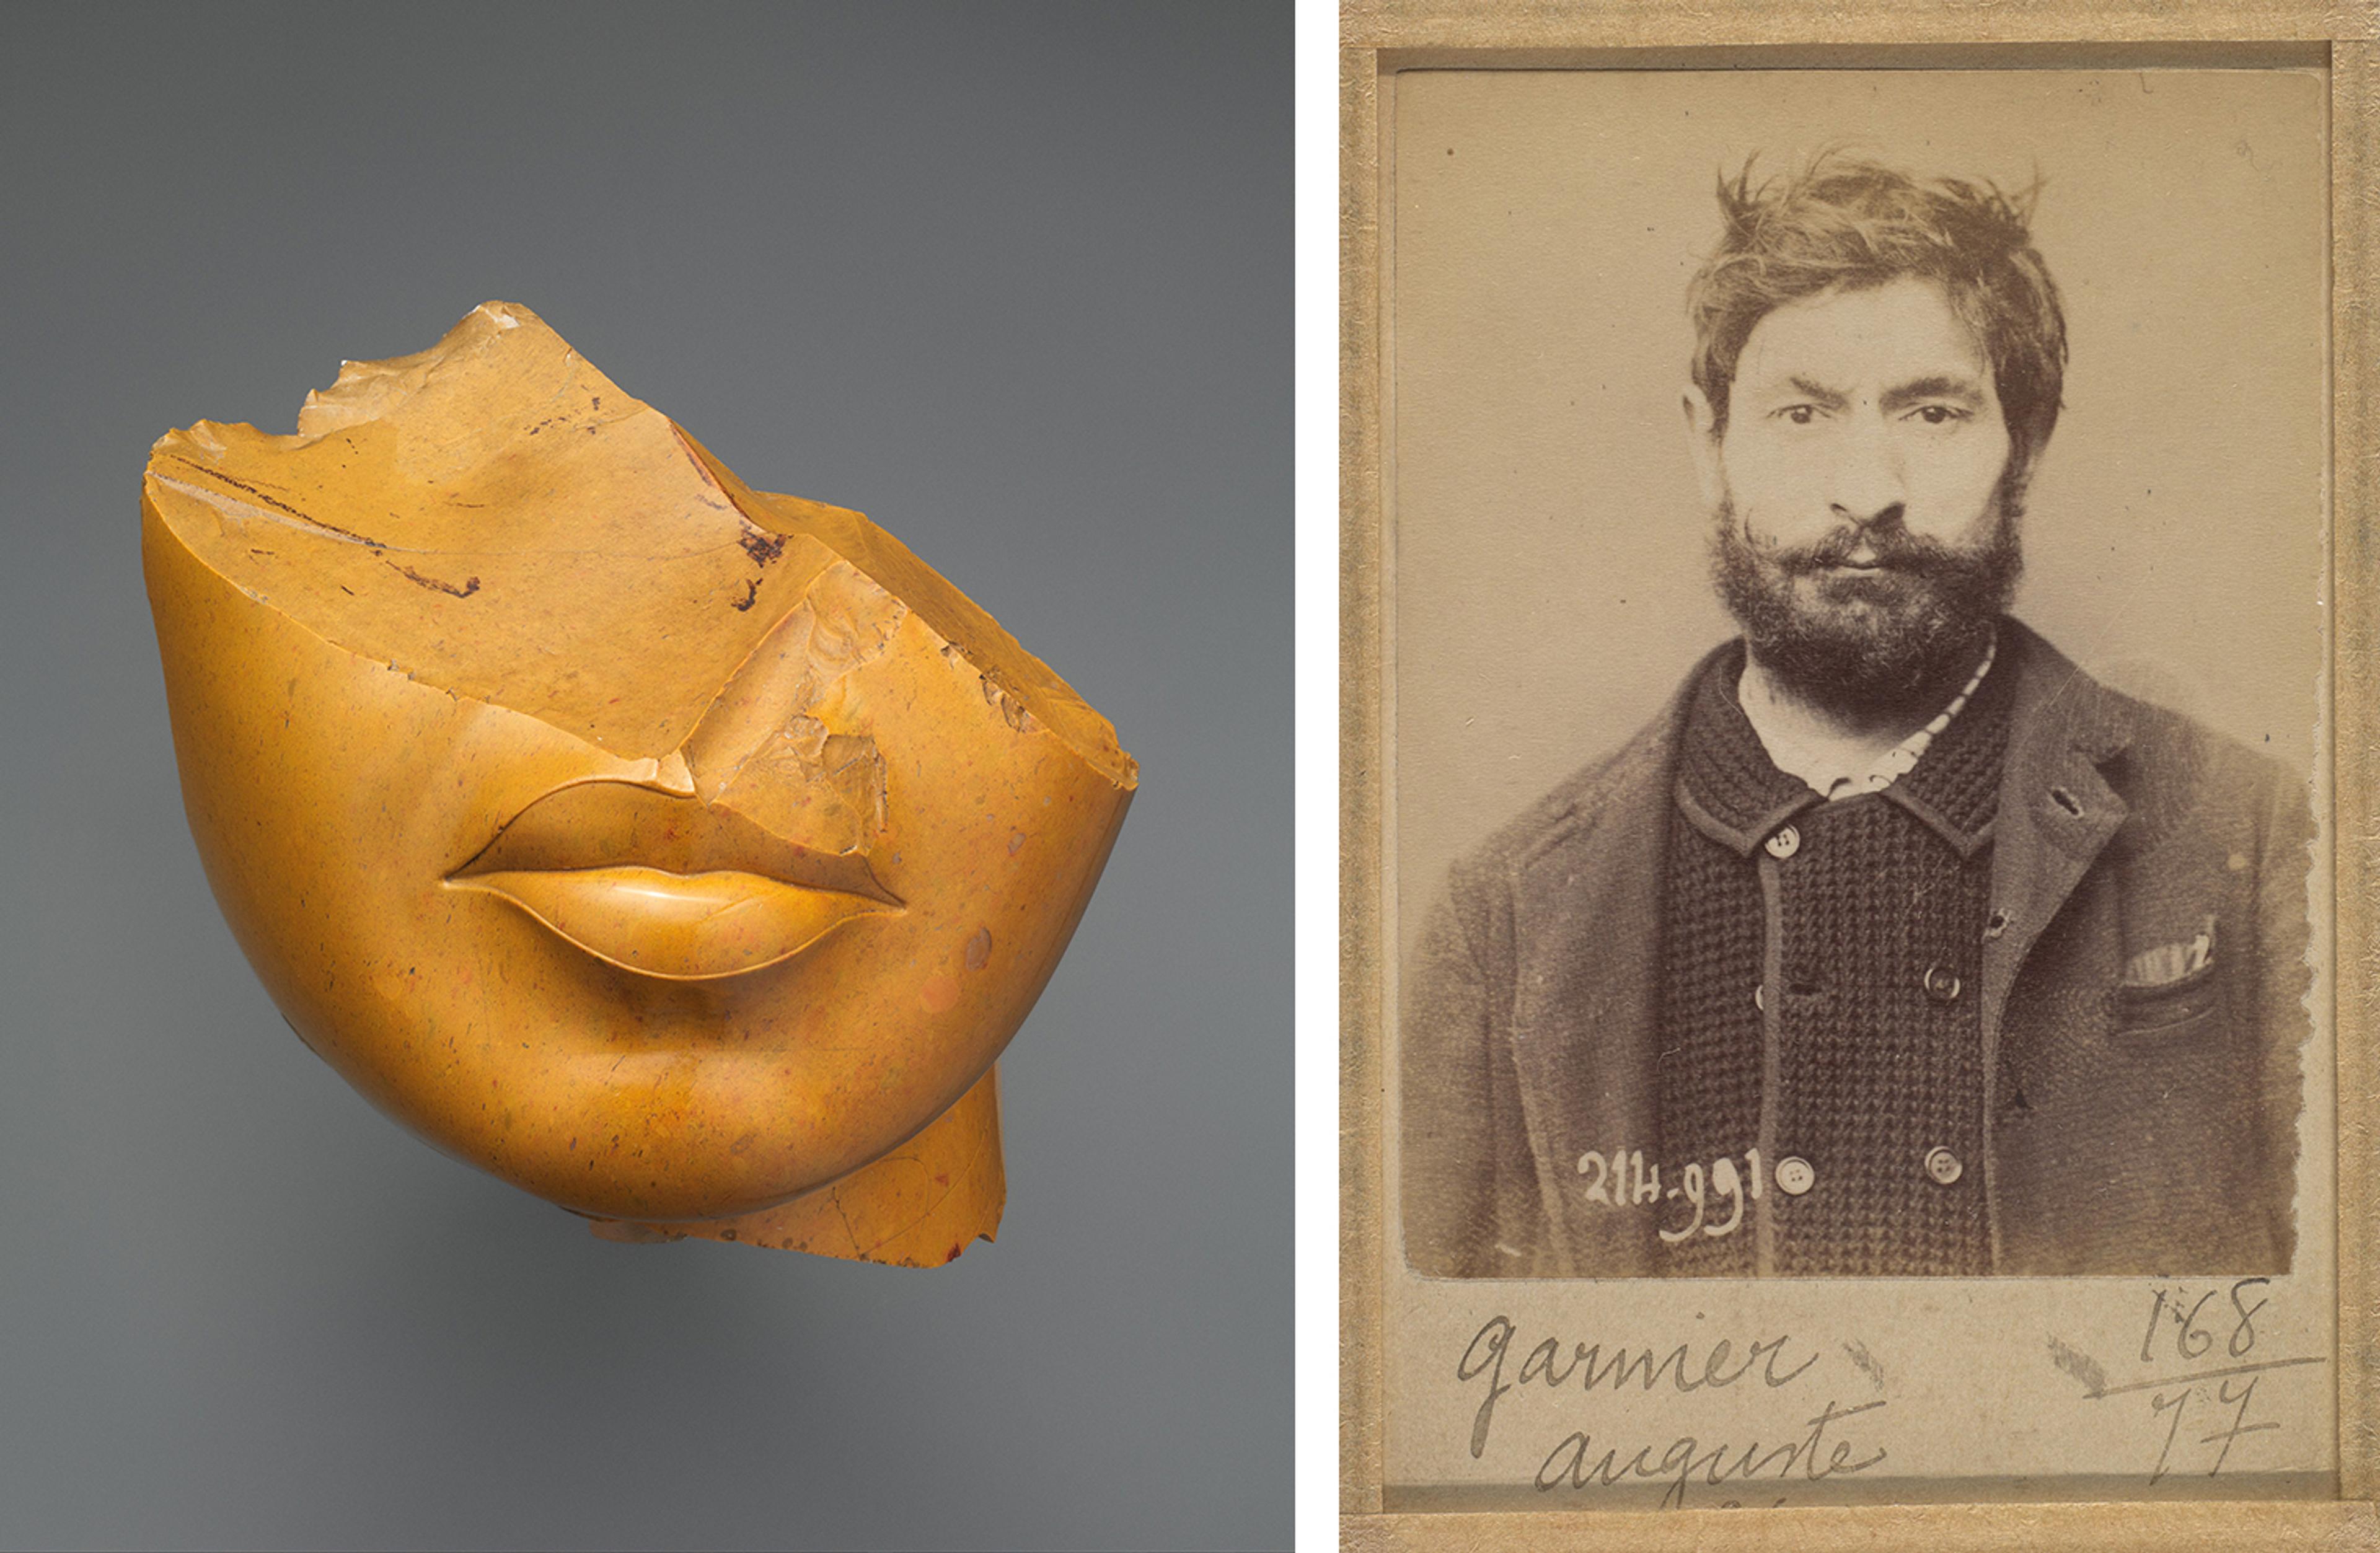 Composite image. On the left is a yellow jasper fragment of an Egyptian queens face where you can only see her lips. On the right is a sepia photograph of a man with a mug shot. 